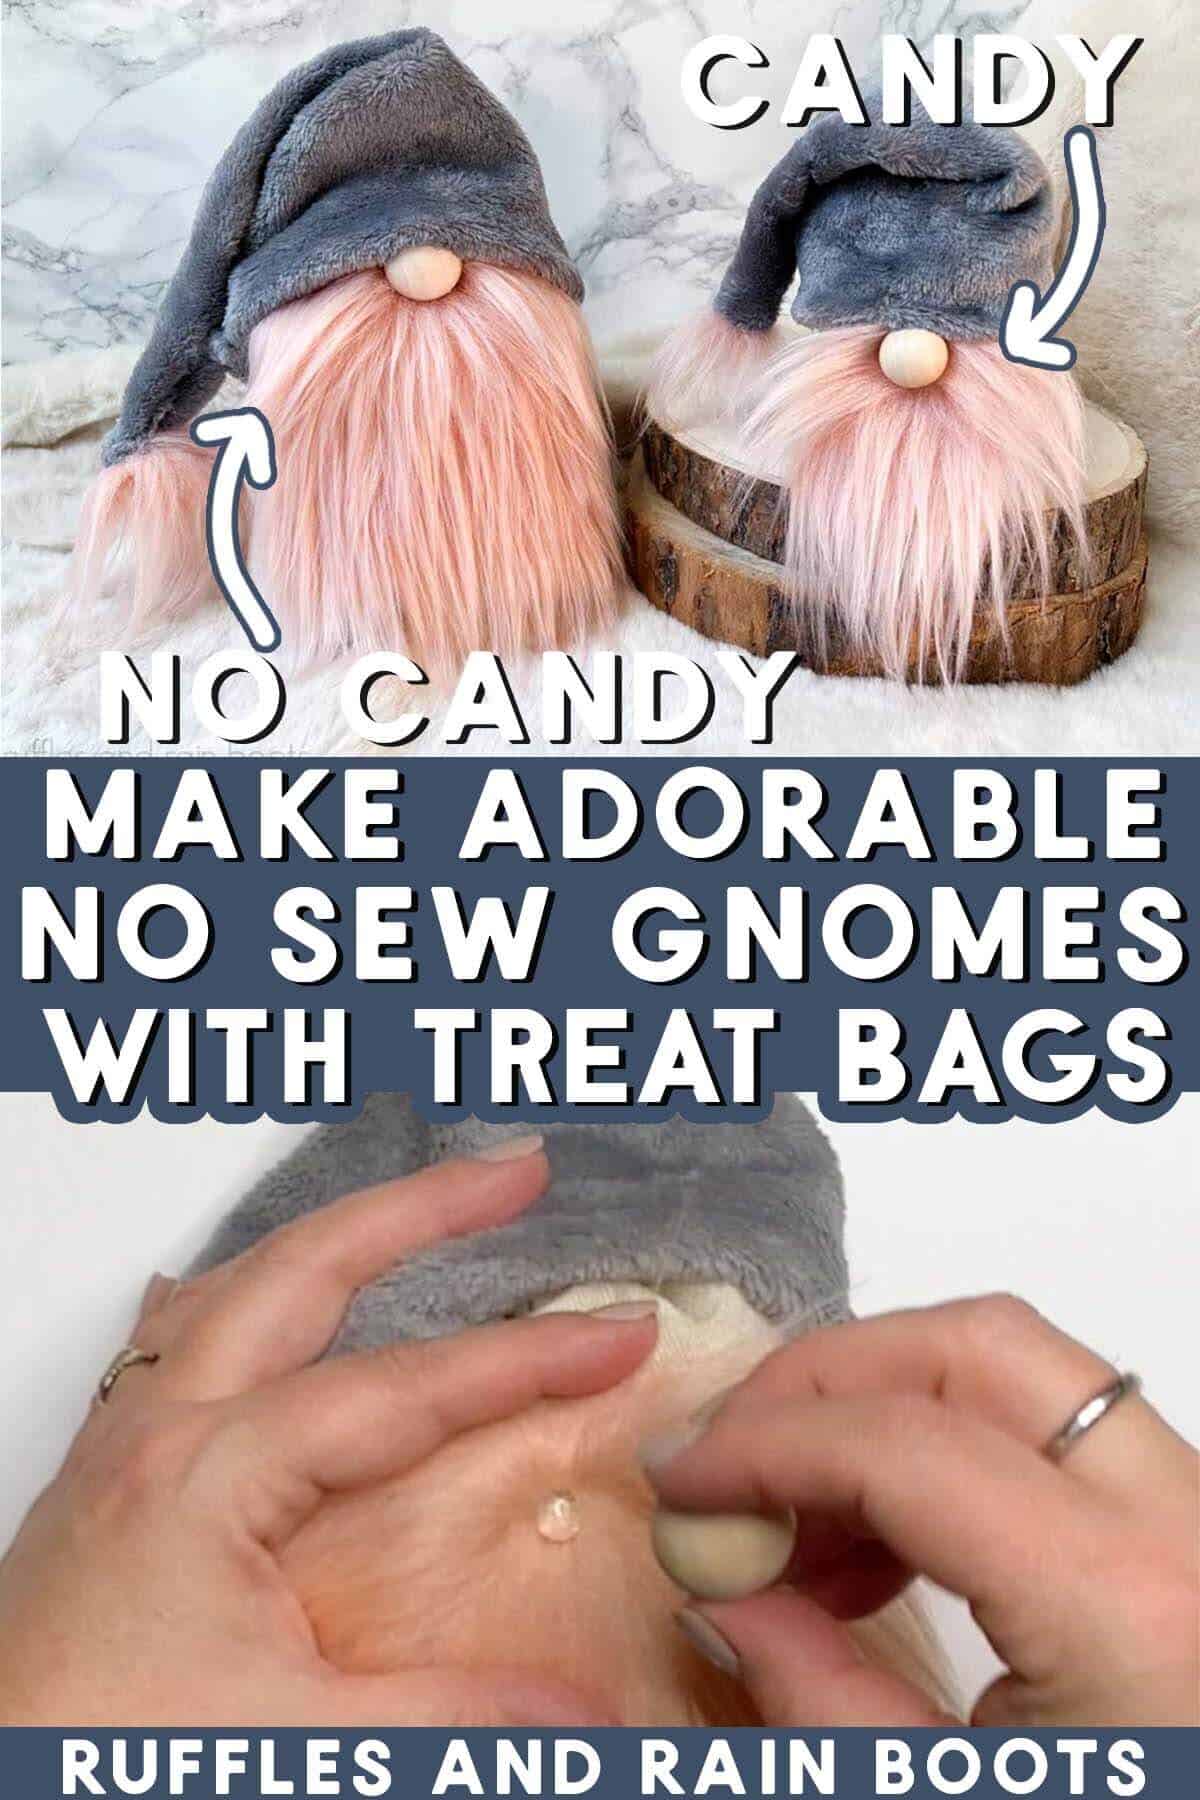 Vertical split image collage showing two gnomes with gray hats and pink beards on top of crafter add glue and wood bead to gnome.